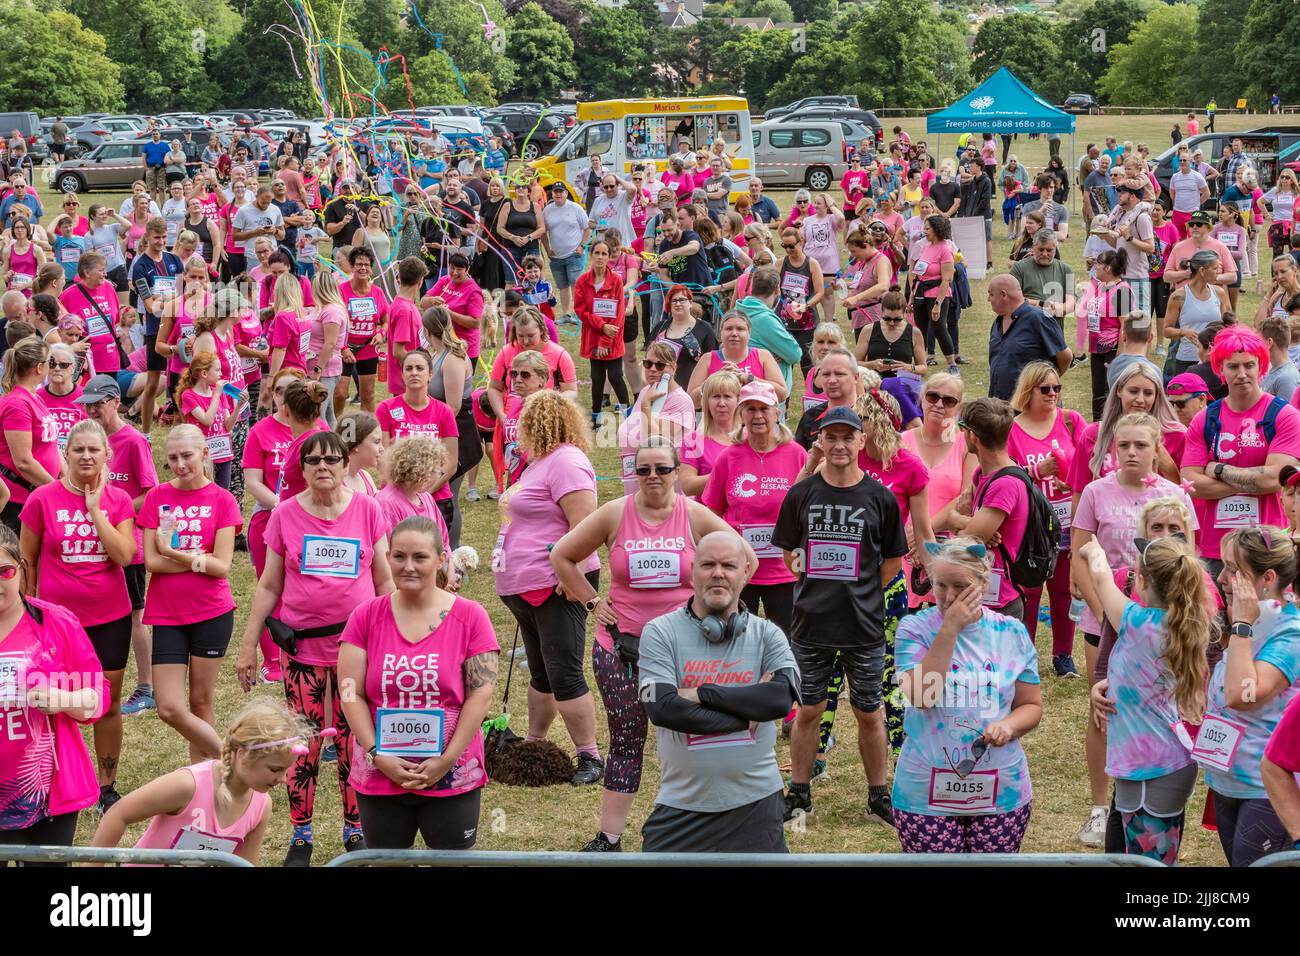 Abington Park, Northampton, UK. 24th July 2022. Race for Life raising funds for Cancer Research with over £88,000 being raised over the two day event of the weekend. Credit: Keith J Smith./Alamy Live News. Stock Photo